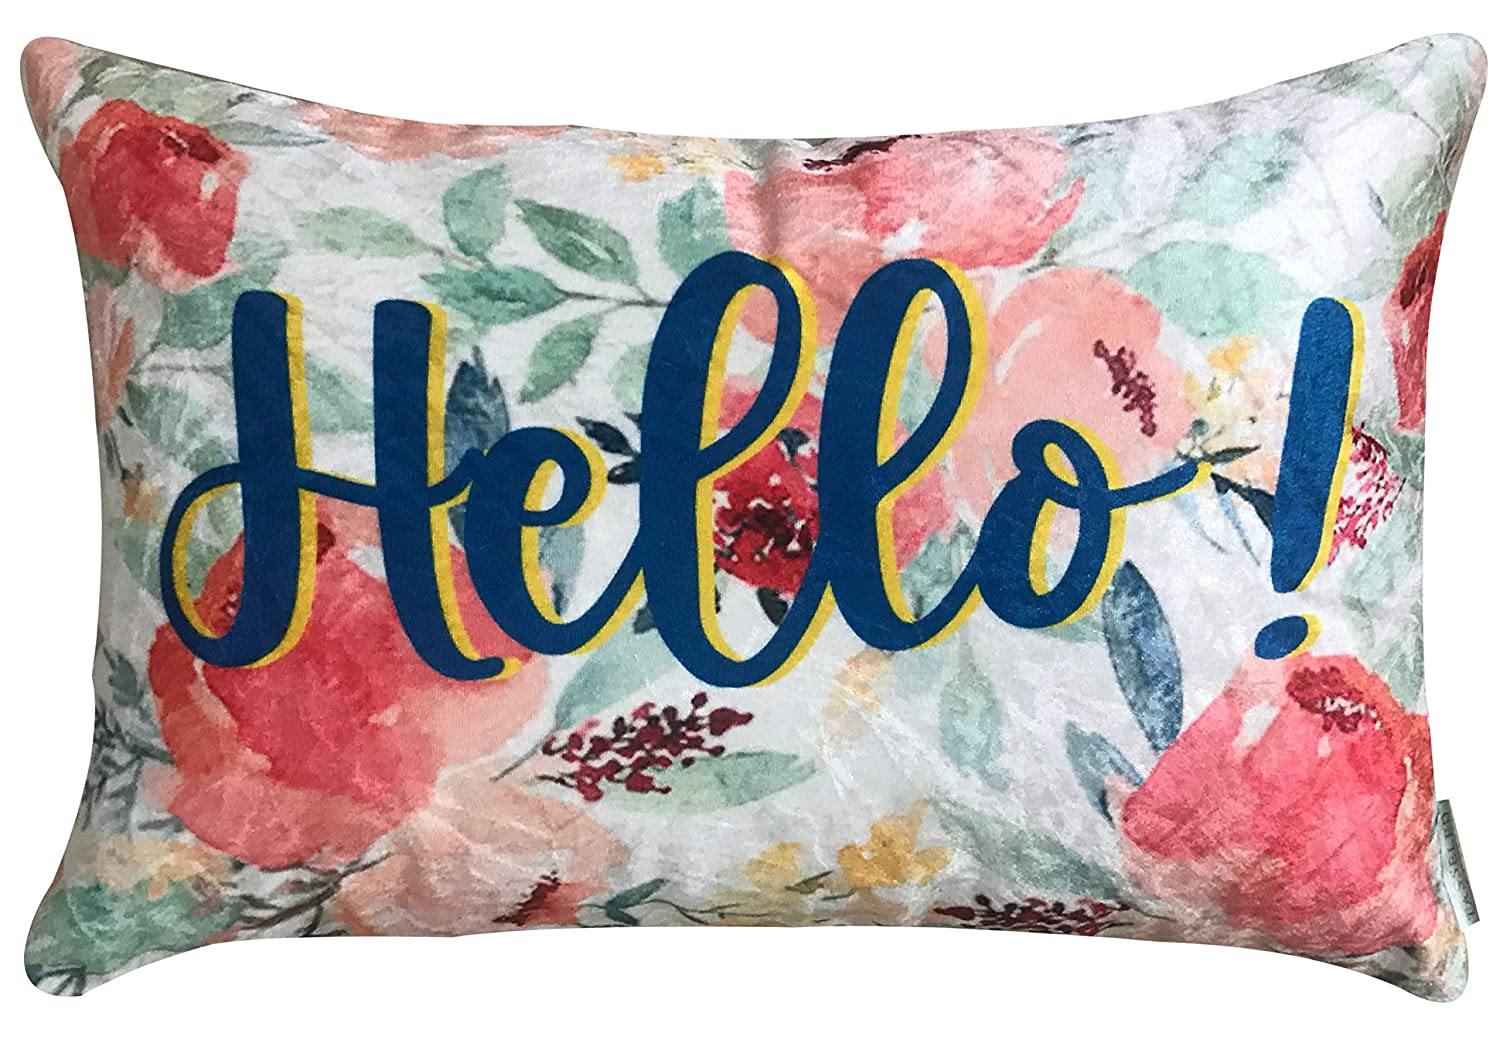 Hello Collection Velvet Cushion Cover (Multicolour, 2-16 in x 16in, 1-12 x 18 inch) - Tasseled Home